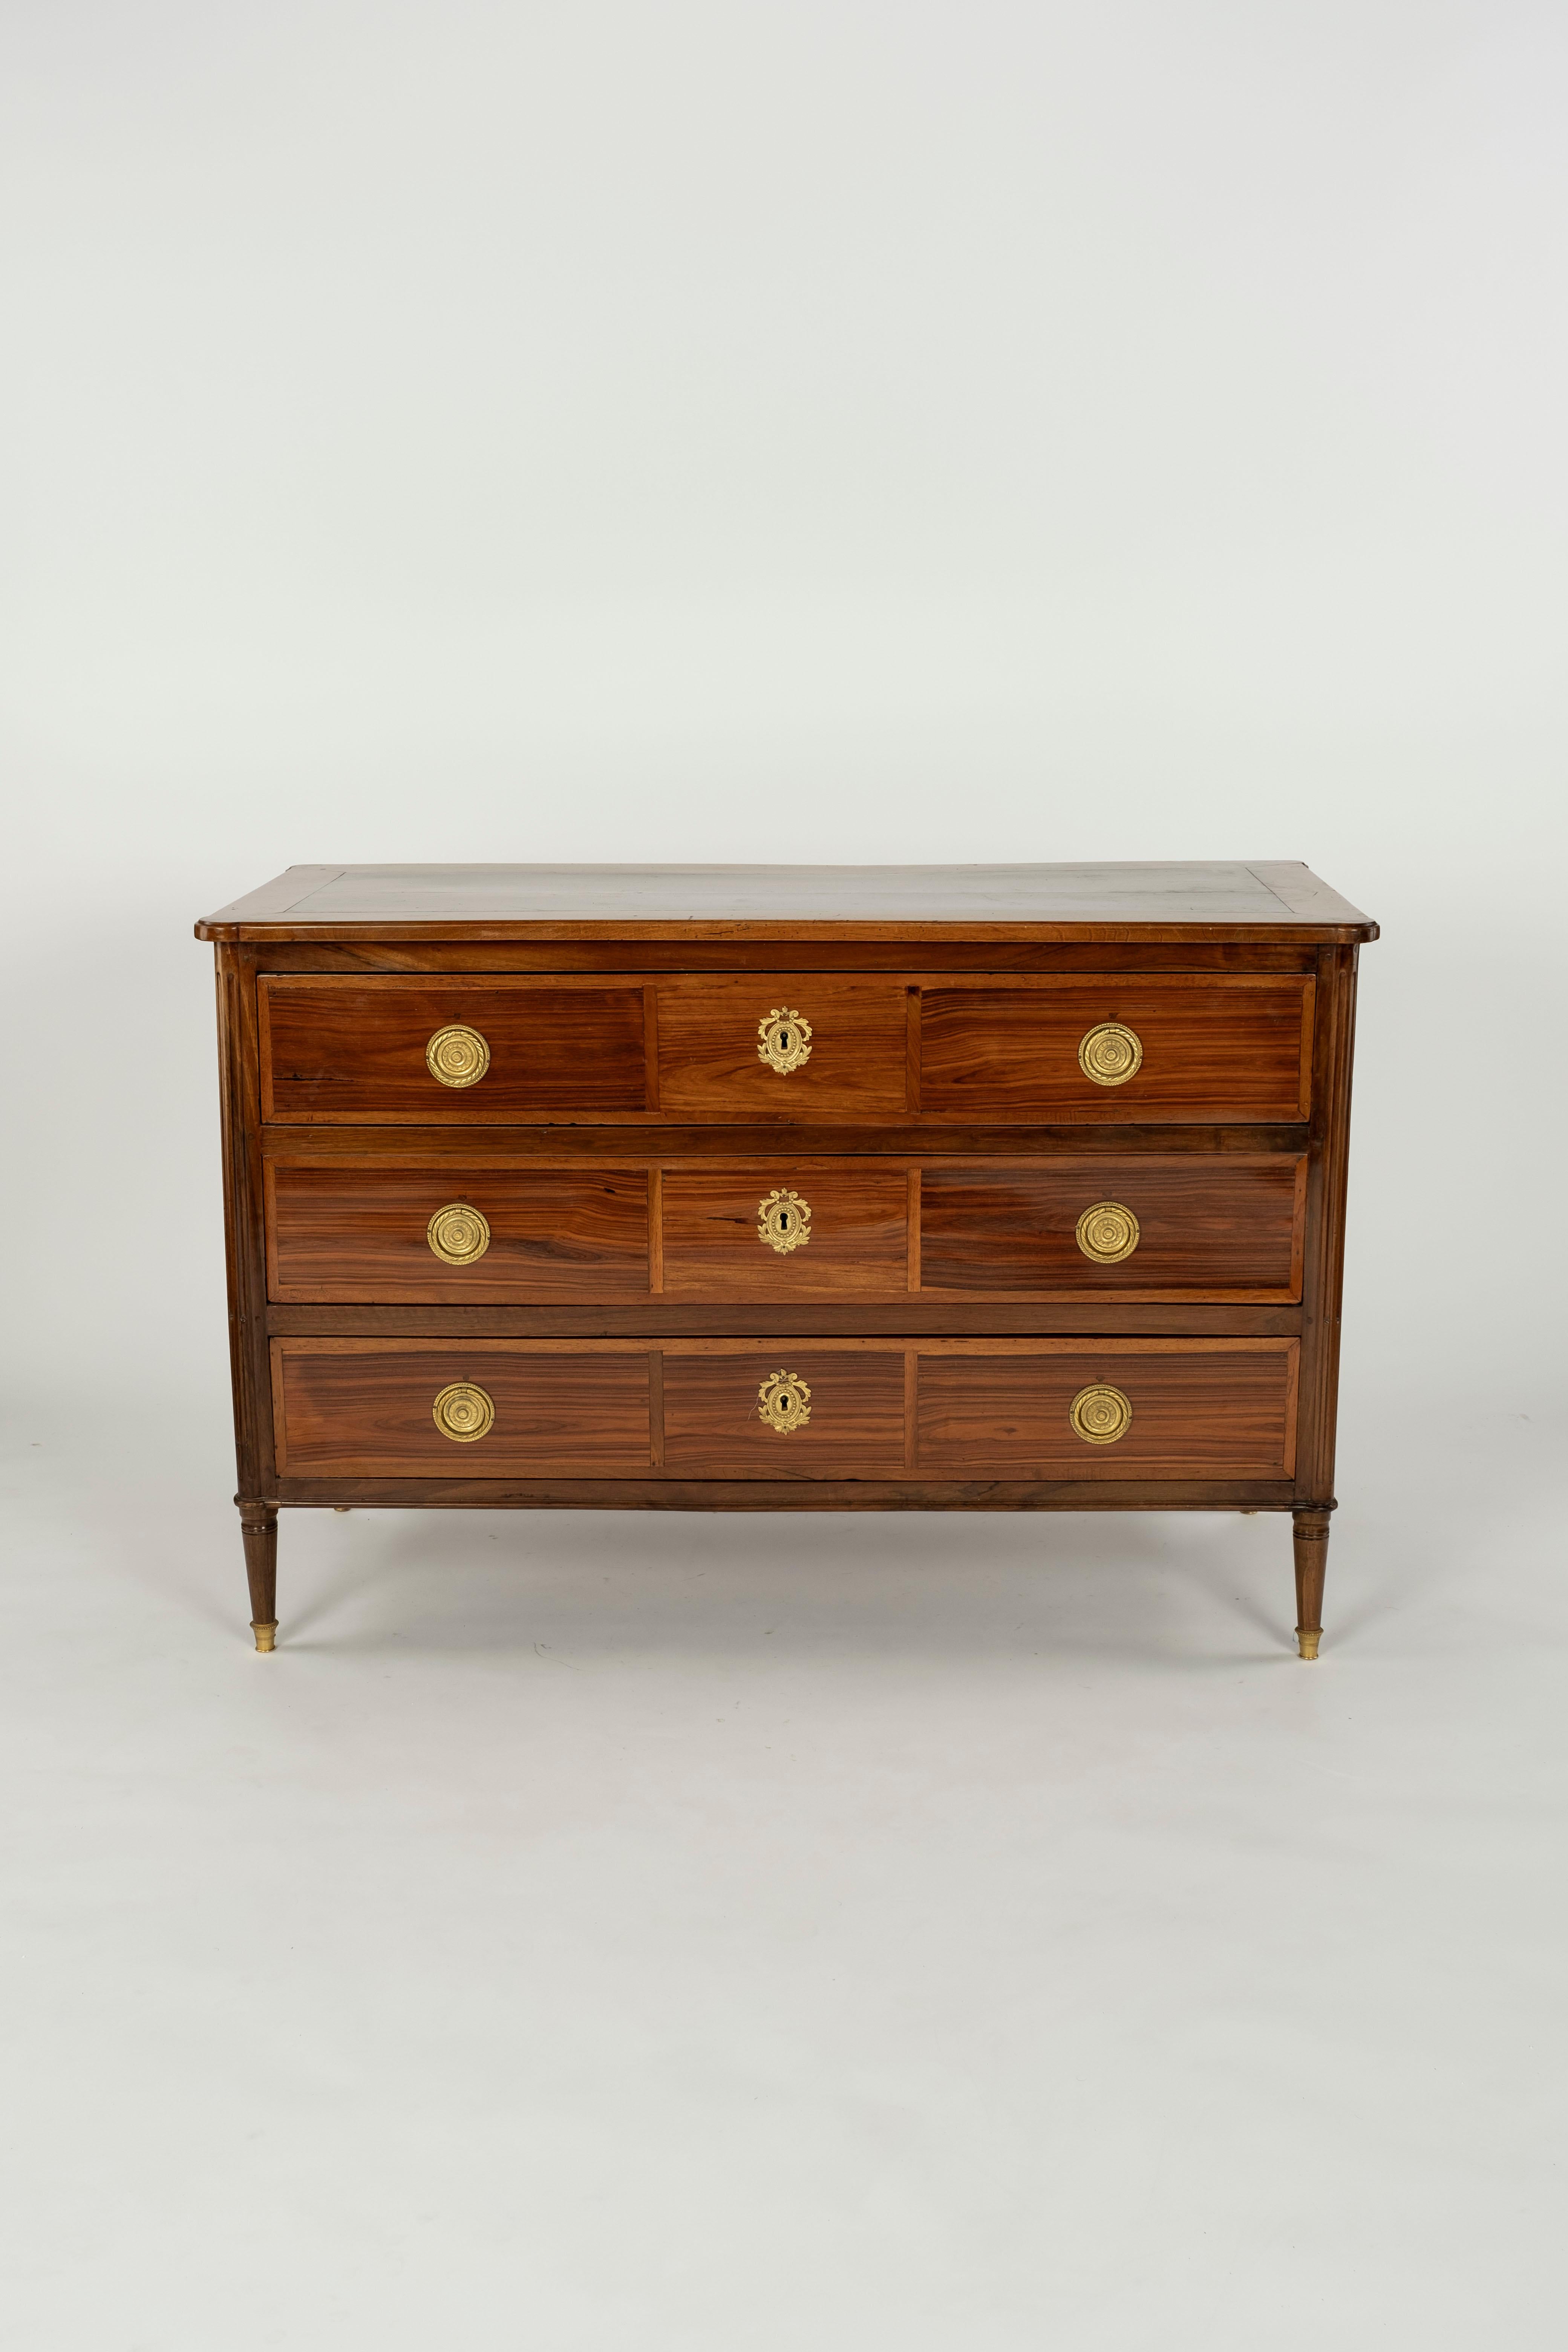 French Louis XVI rosewood commode, attributed to Nicolas Petit (French, 1732-1791, master 1761), 18th c. and later elements, three drawers flanked by fluted corner posts, rising on tapered cylindrical legs, ending in metal-capped feet, later